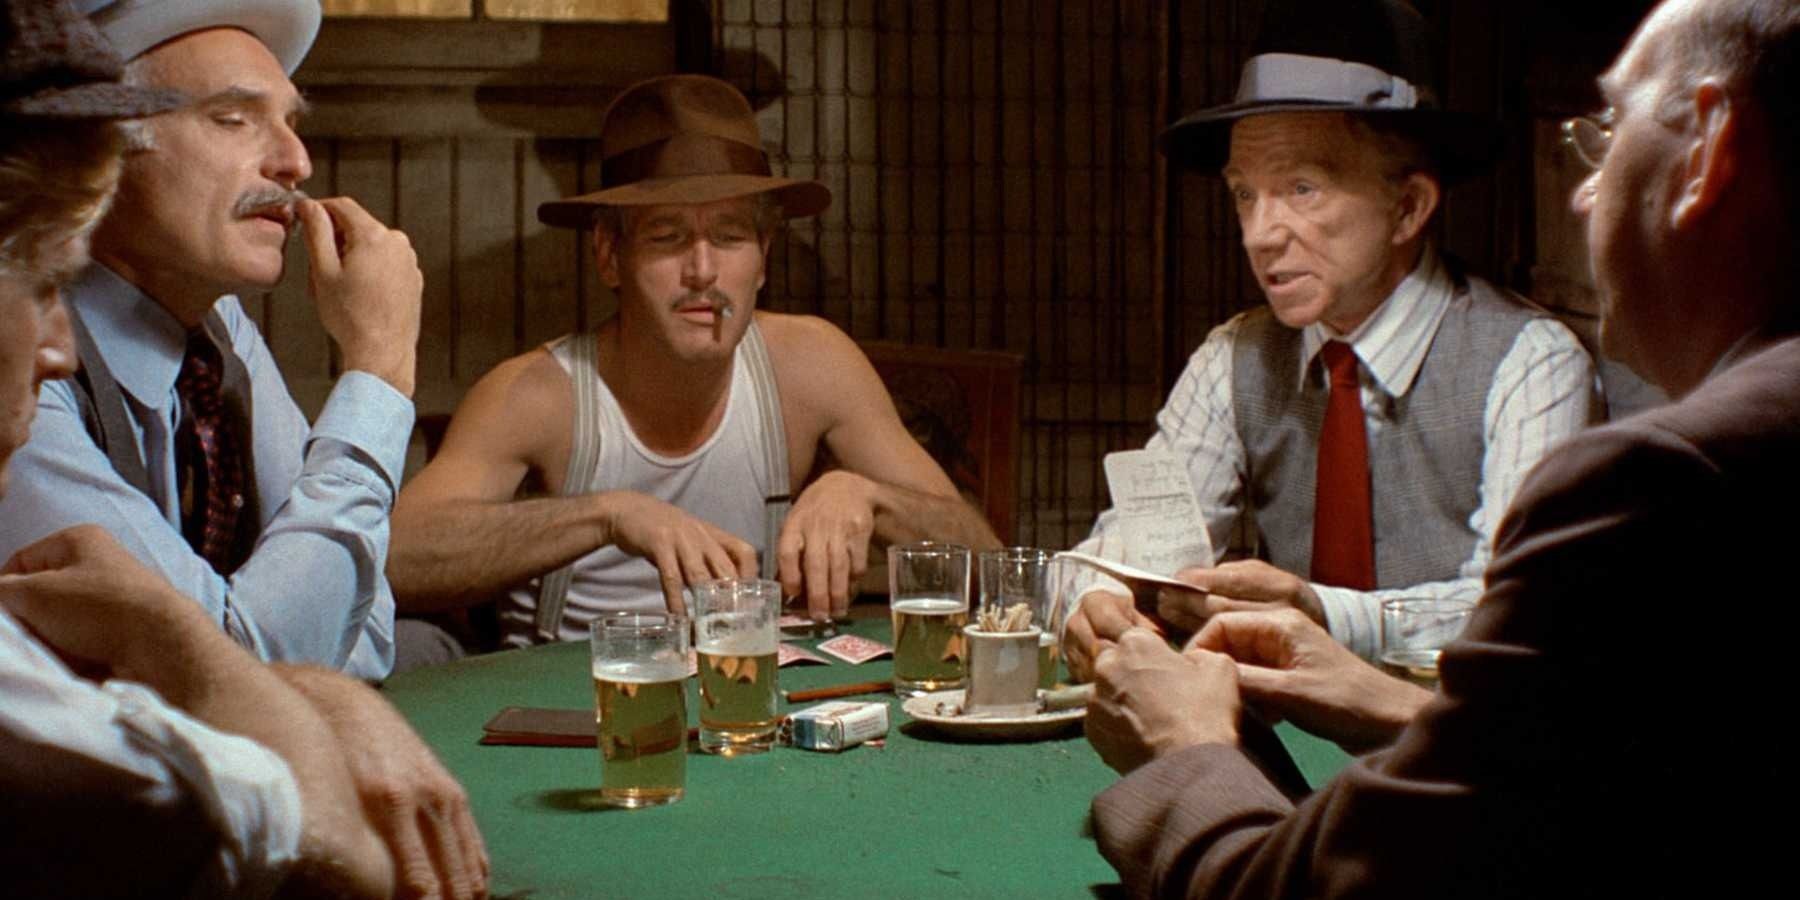 Paul Newman at poker table in The Sting